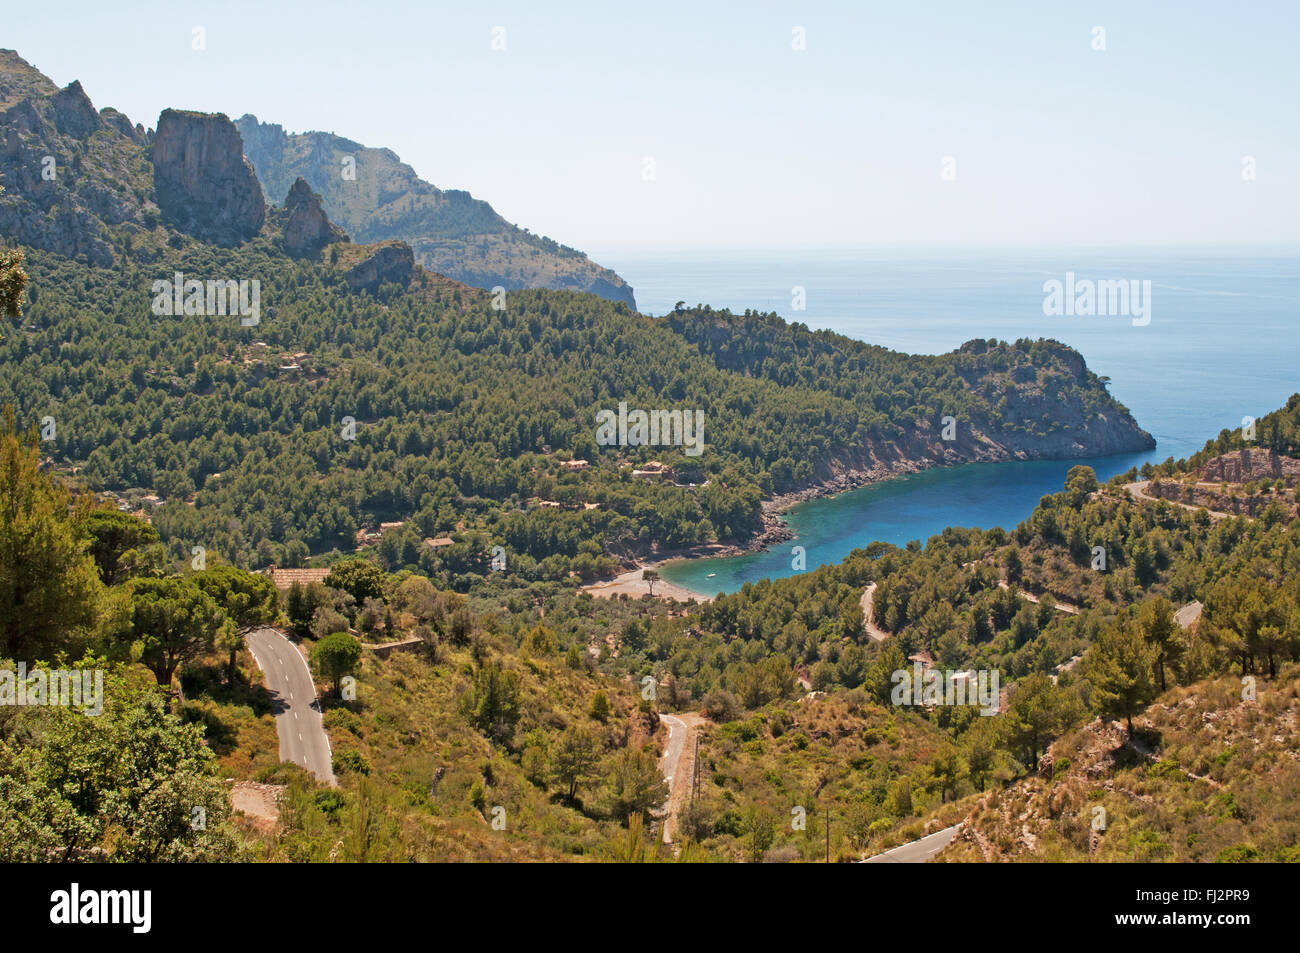 Mallorca, Balearic Islands, Spain: the winding road leading in Cala Tuent, a remote beach at the foot of the mountain range of the Serra de Tramuntana Stock Photo